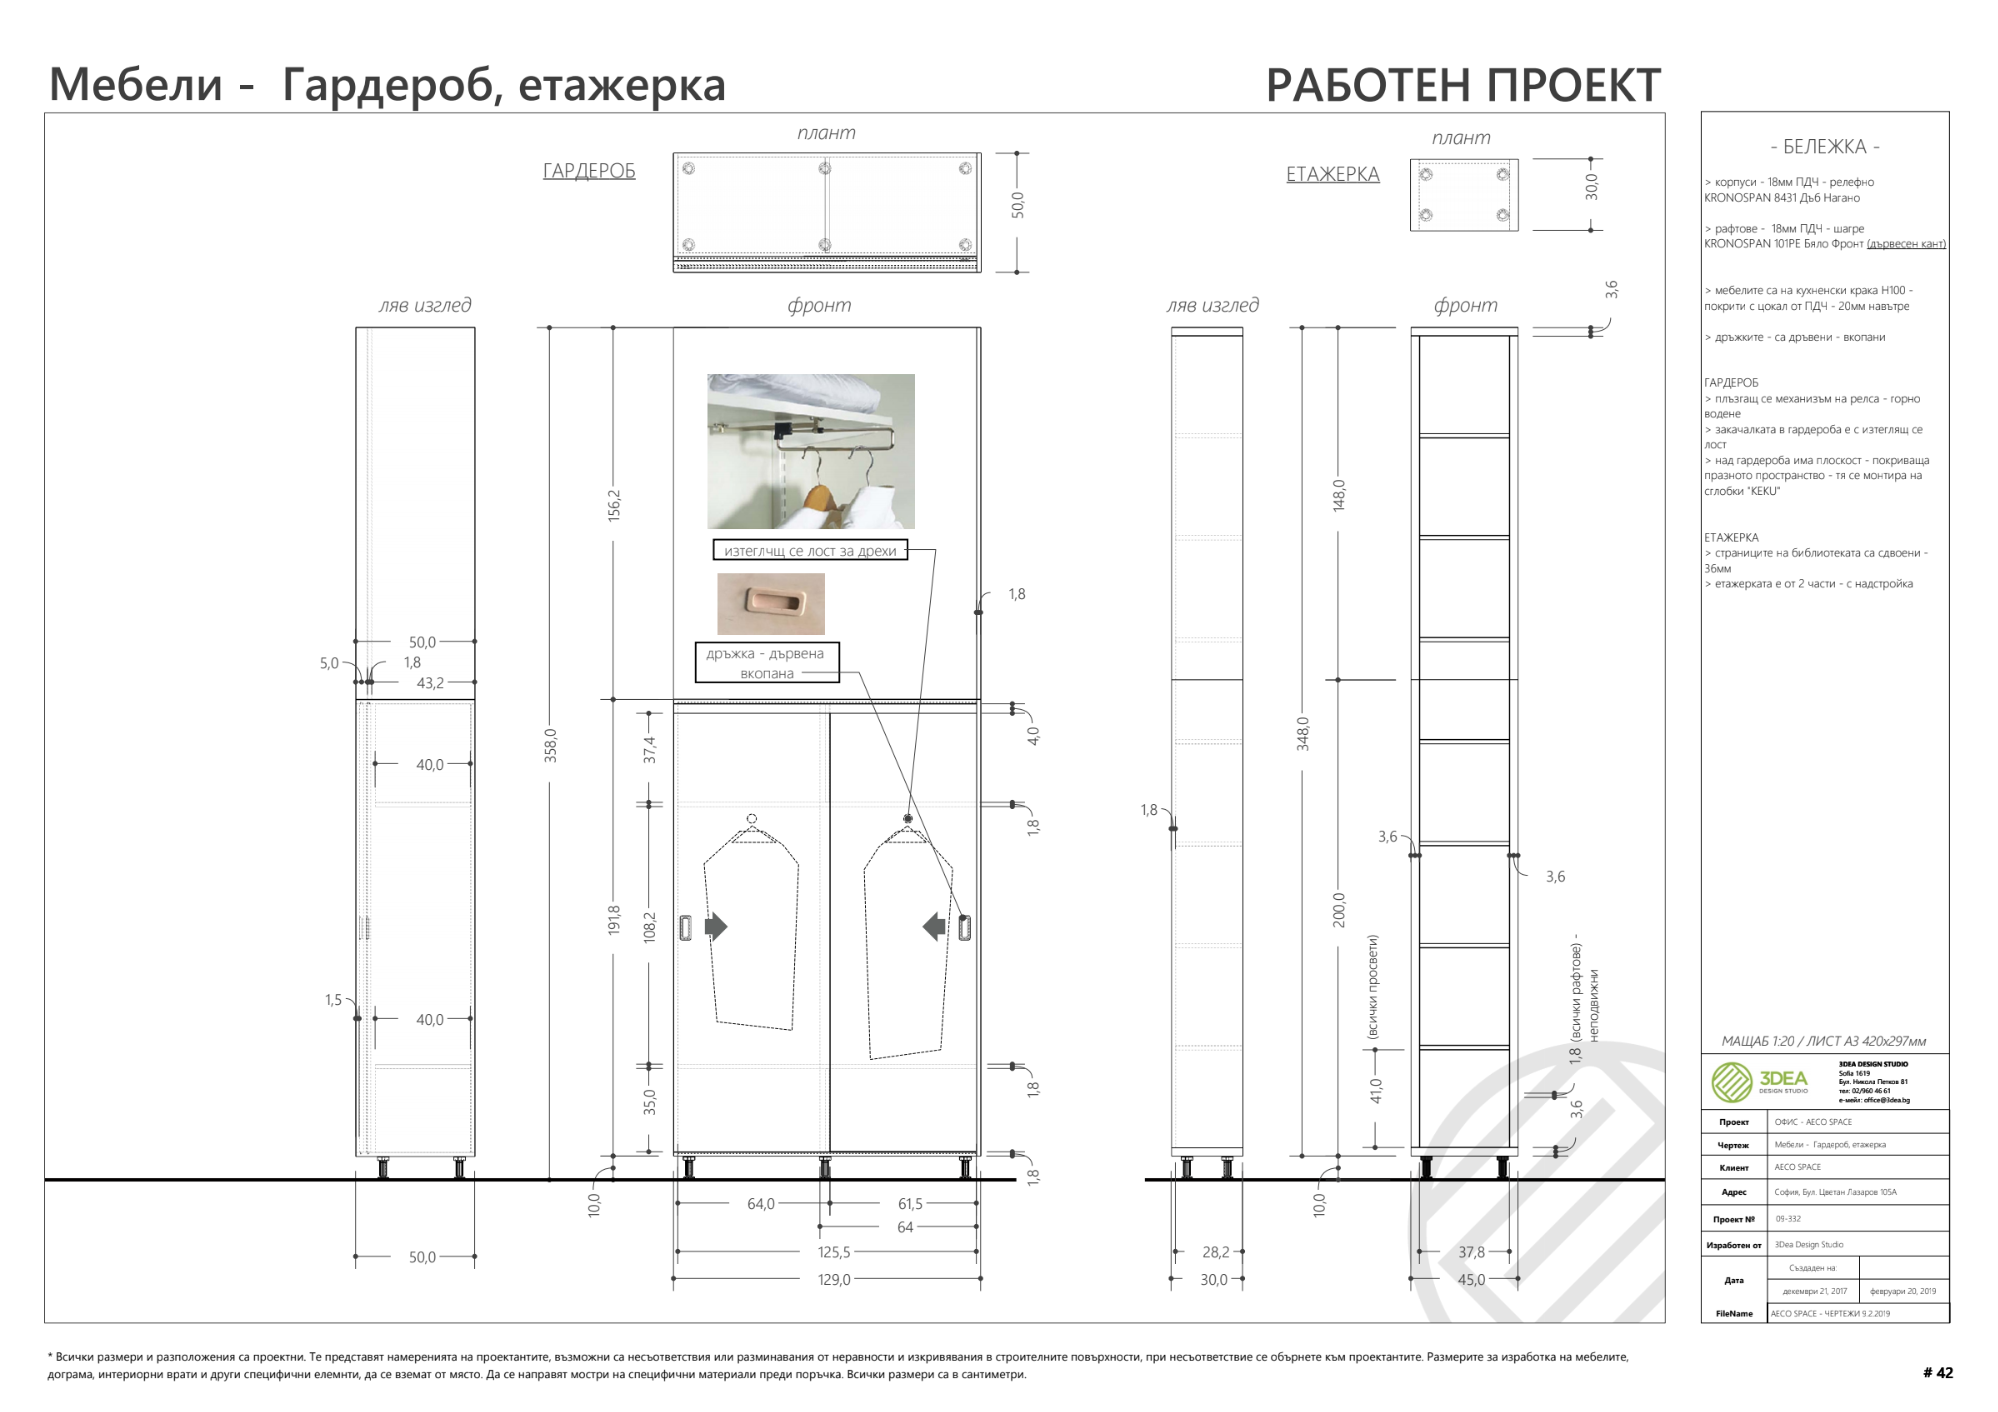 Designing innovative workplace interiors with 3DEA Bulgaria